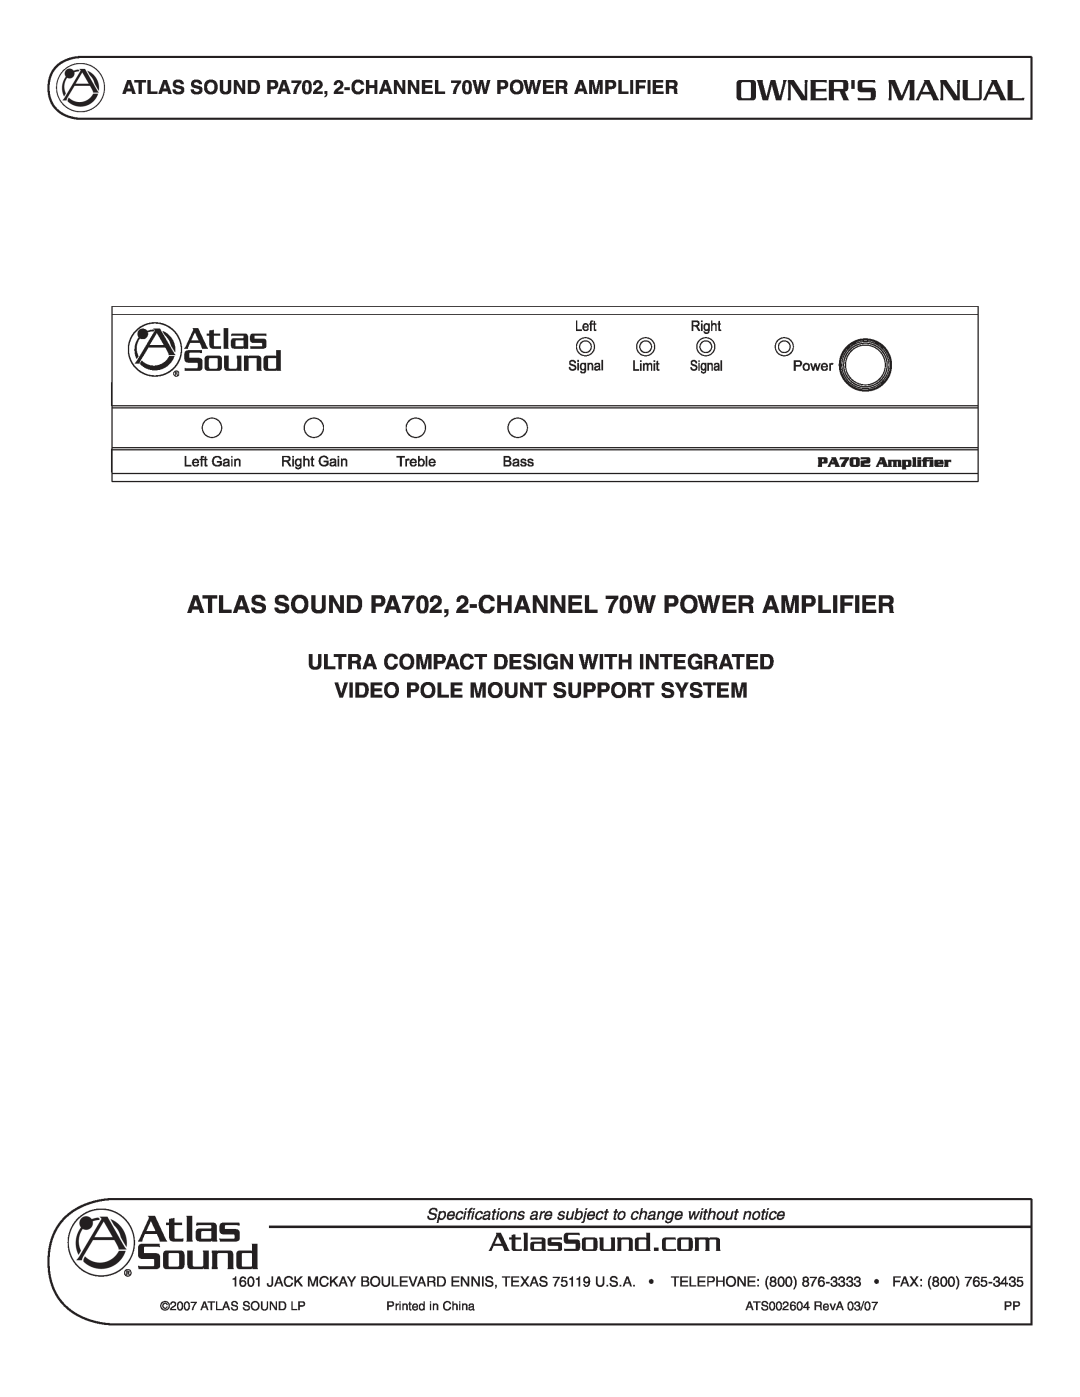 Atlas Sound specifications ATLAS SOUND PA702, 2-CHANNEL70W POWER AMPLIFIER, Ultra Compact Design With Integrated 